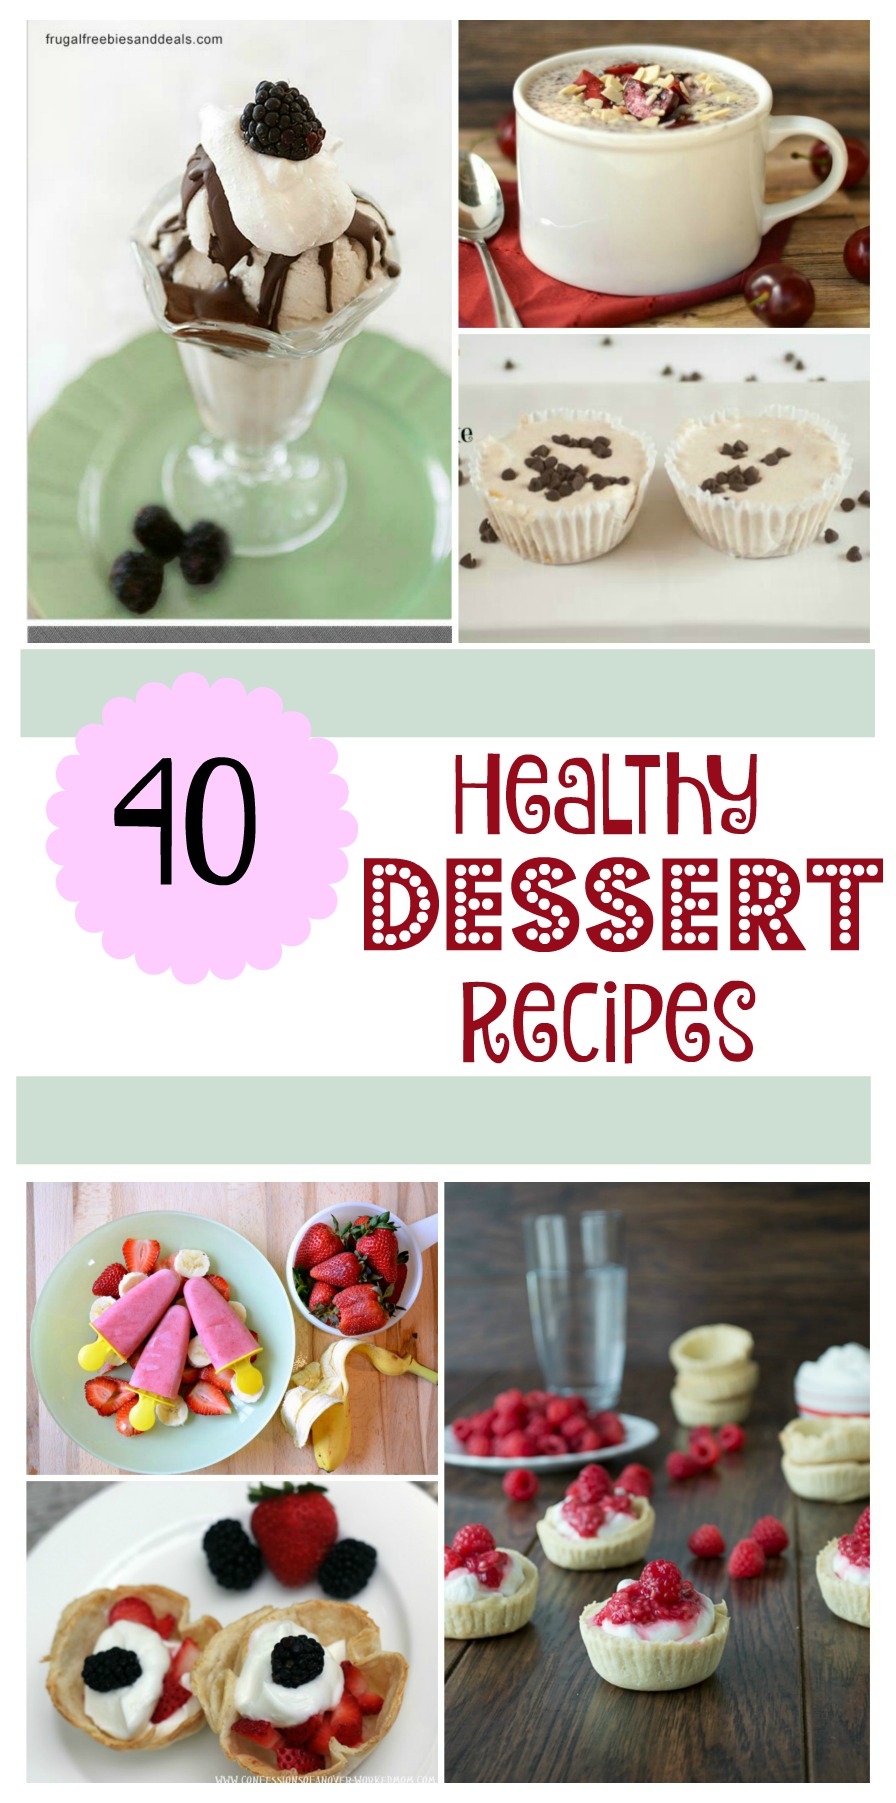 Looking for some amazing recipes? Check out these 40 healthy dessert recipes here! 